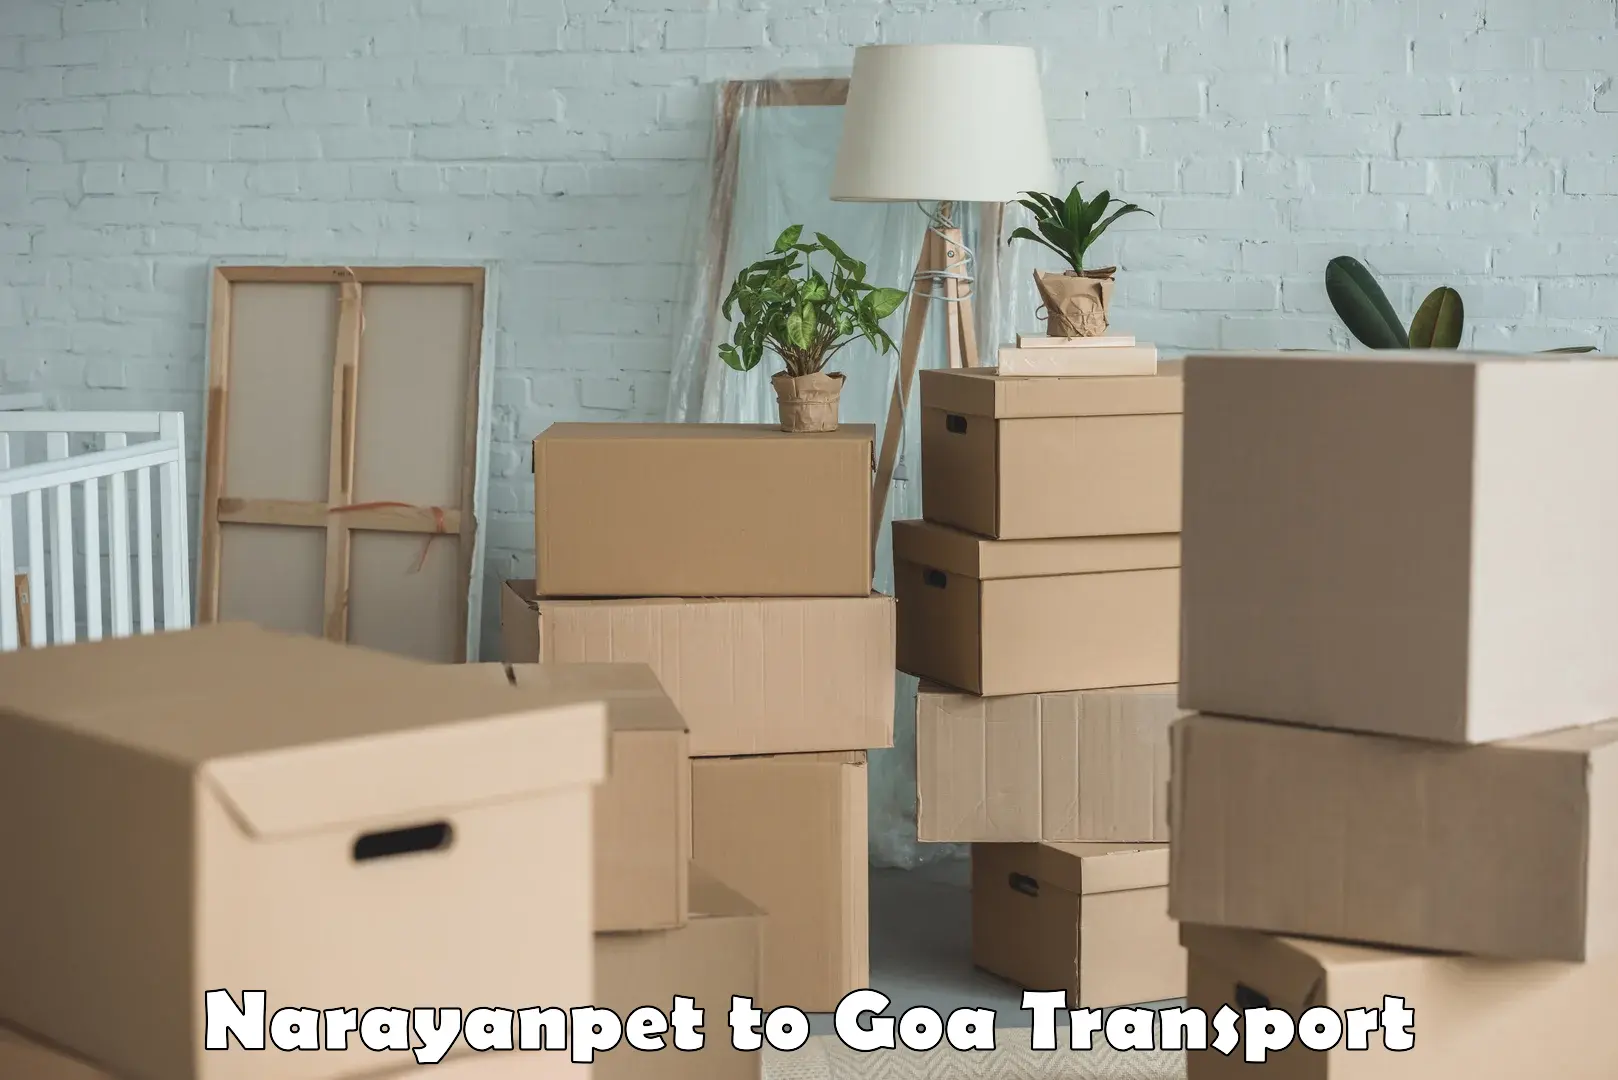 Container transport service Narayanpet to Goa